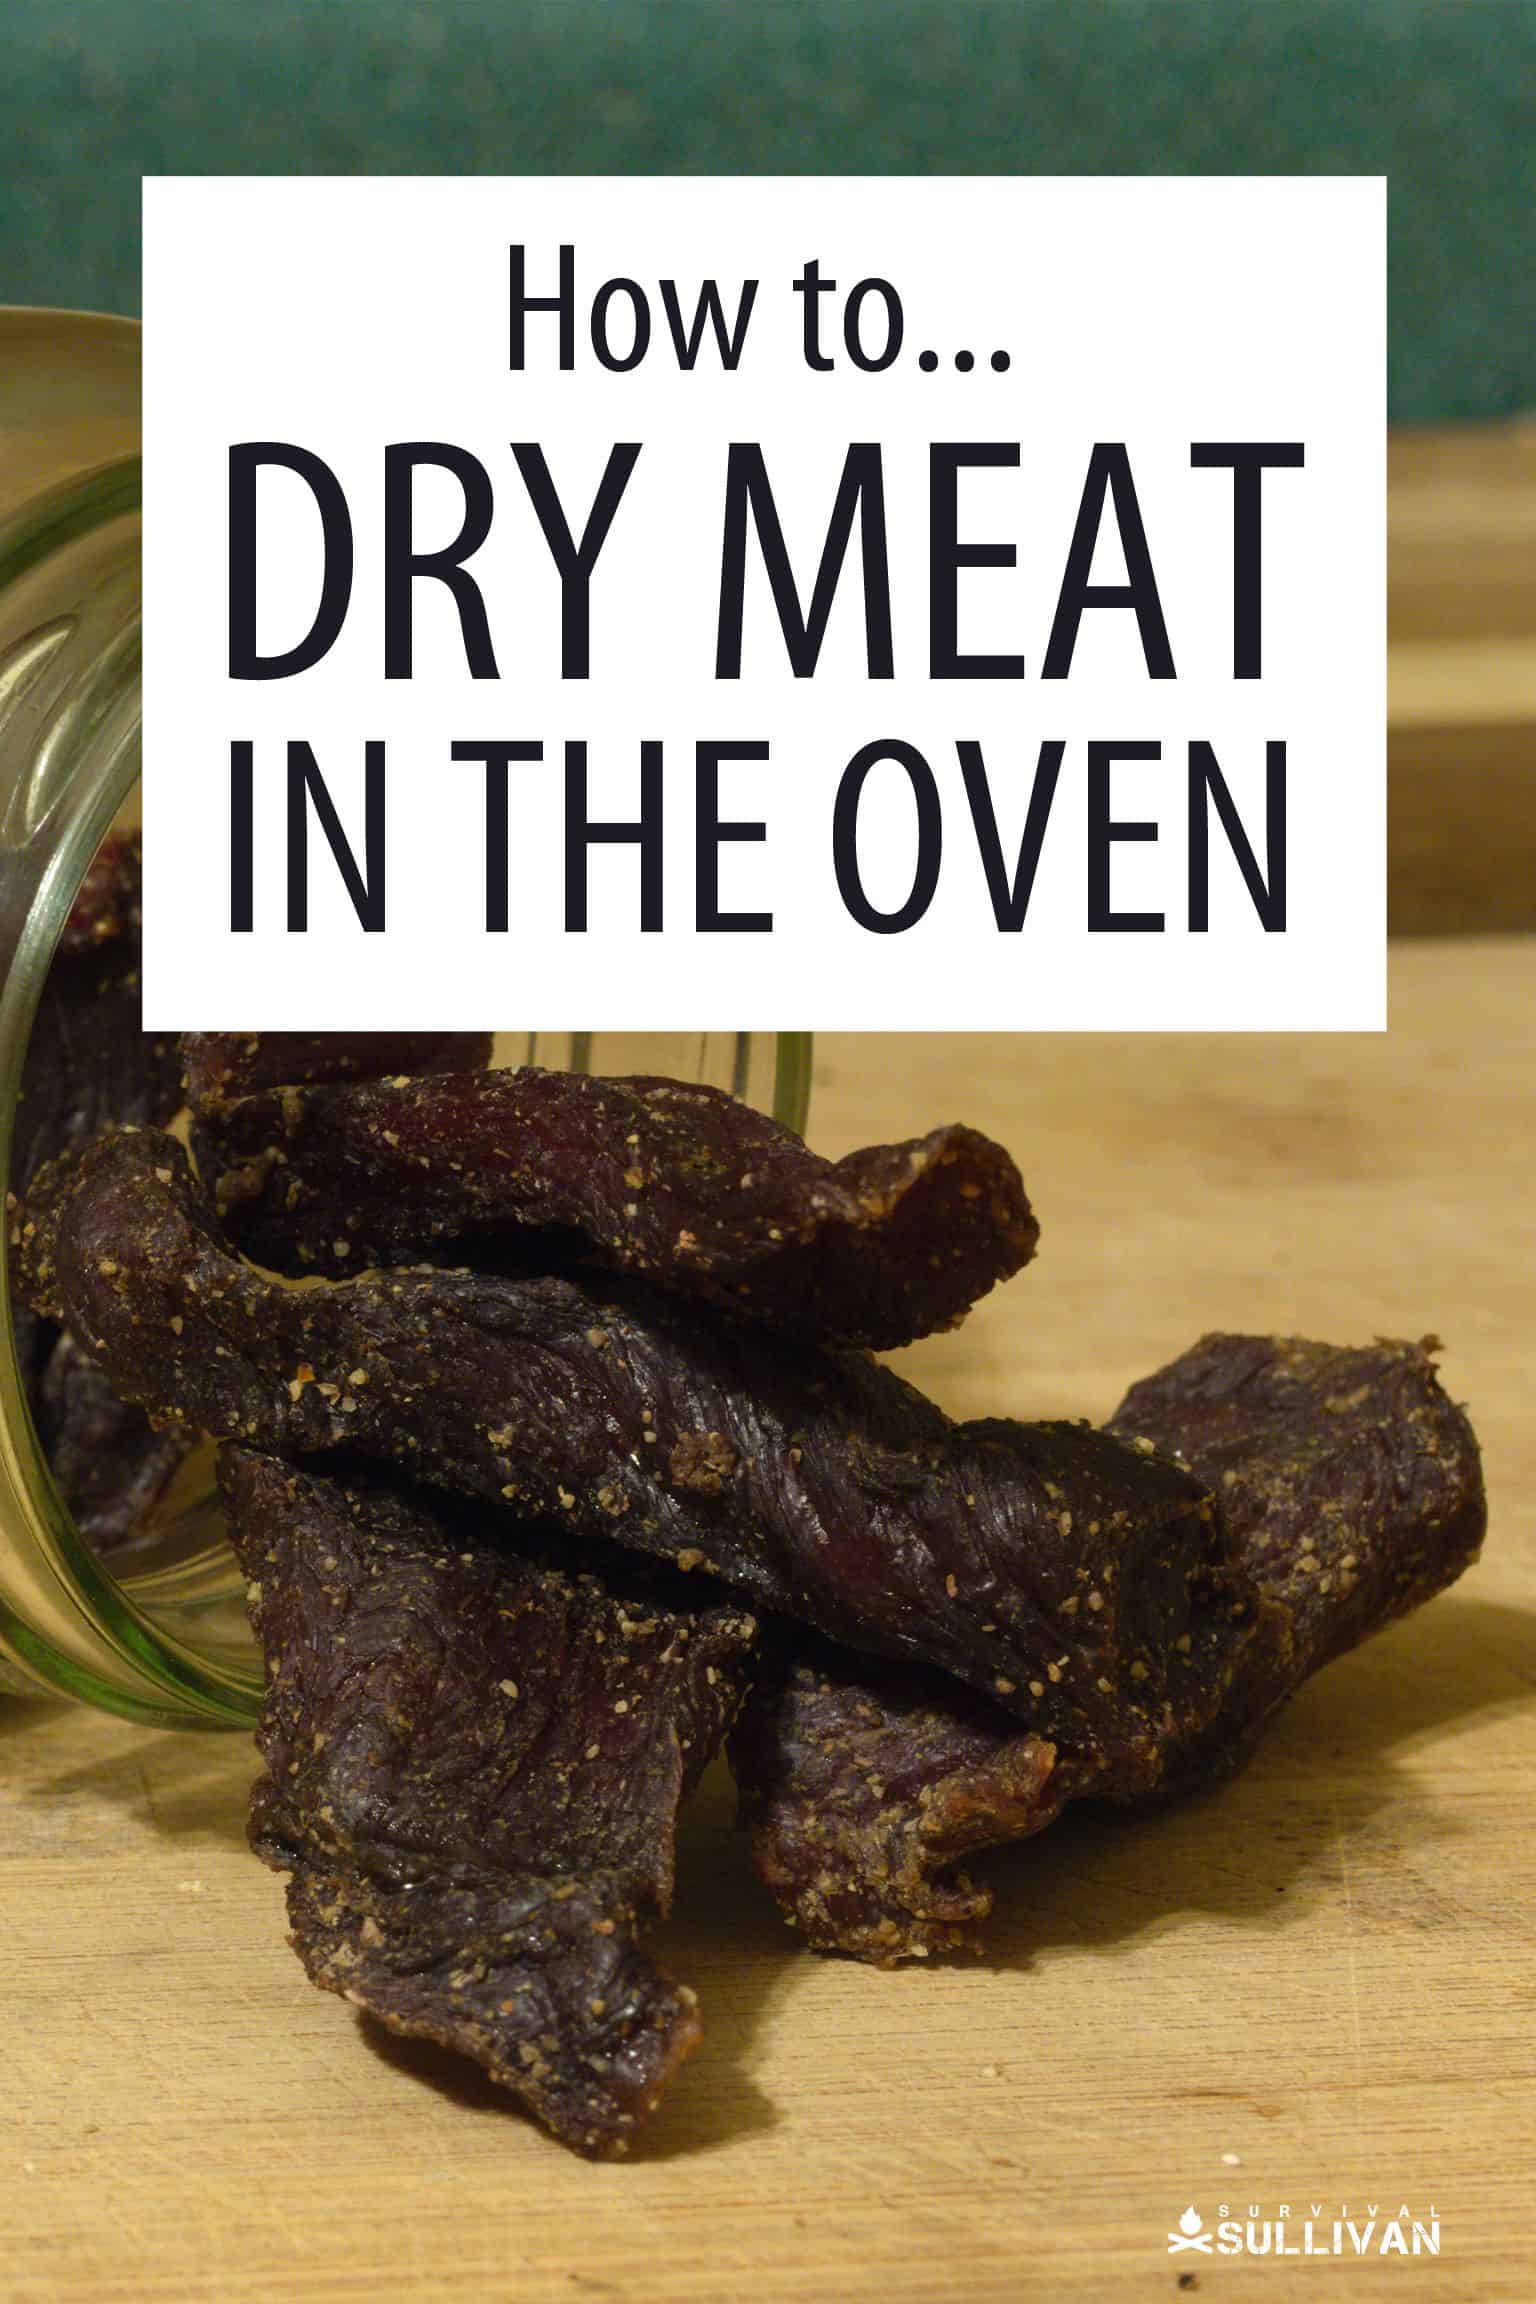 drying meat oven Pinterest image 